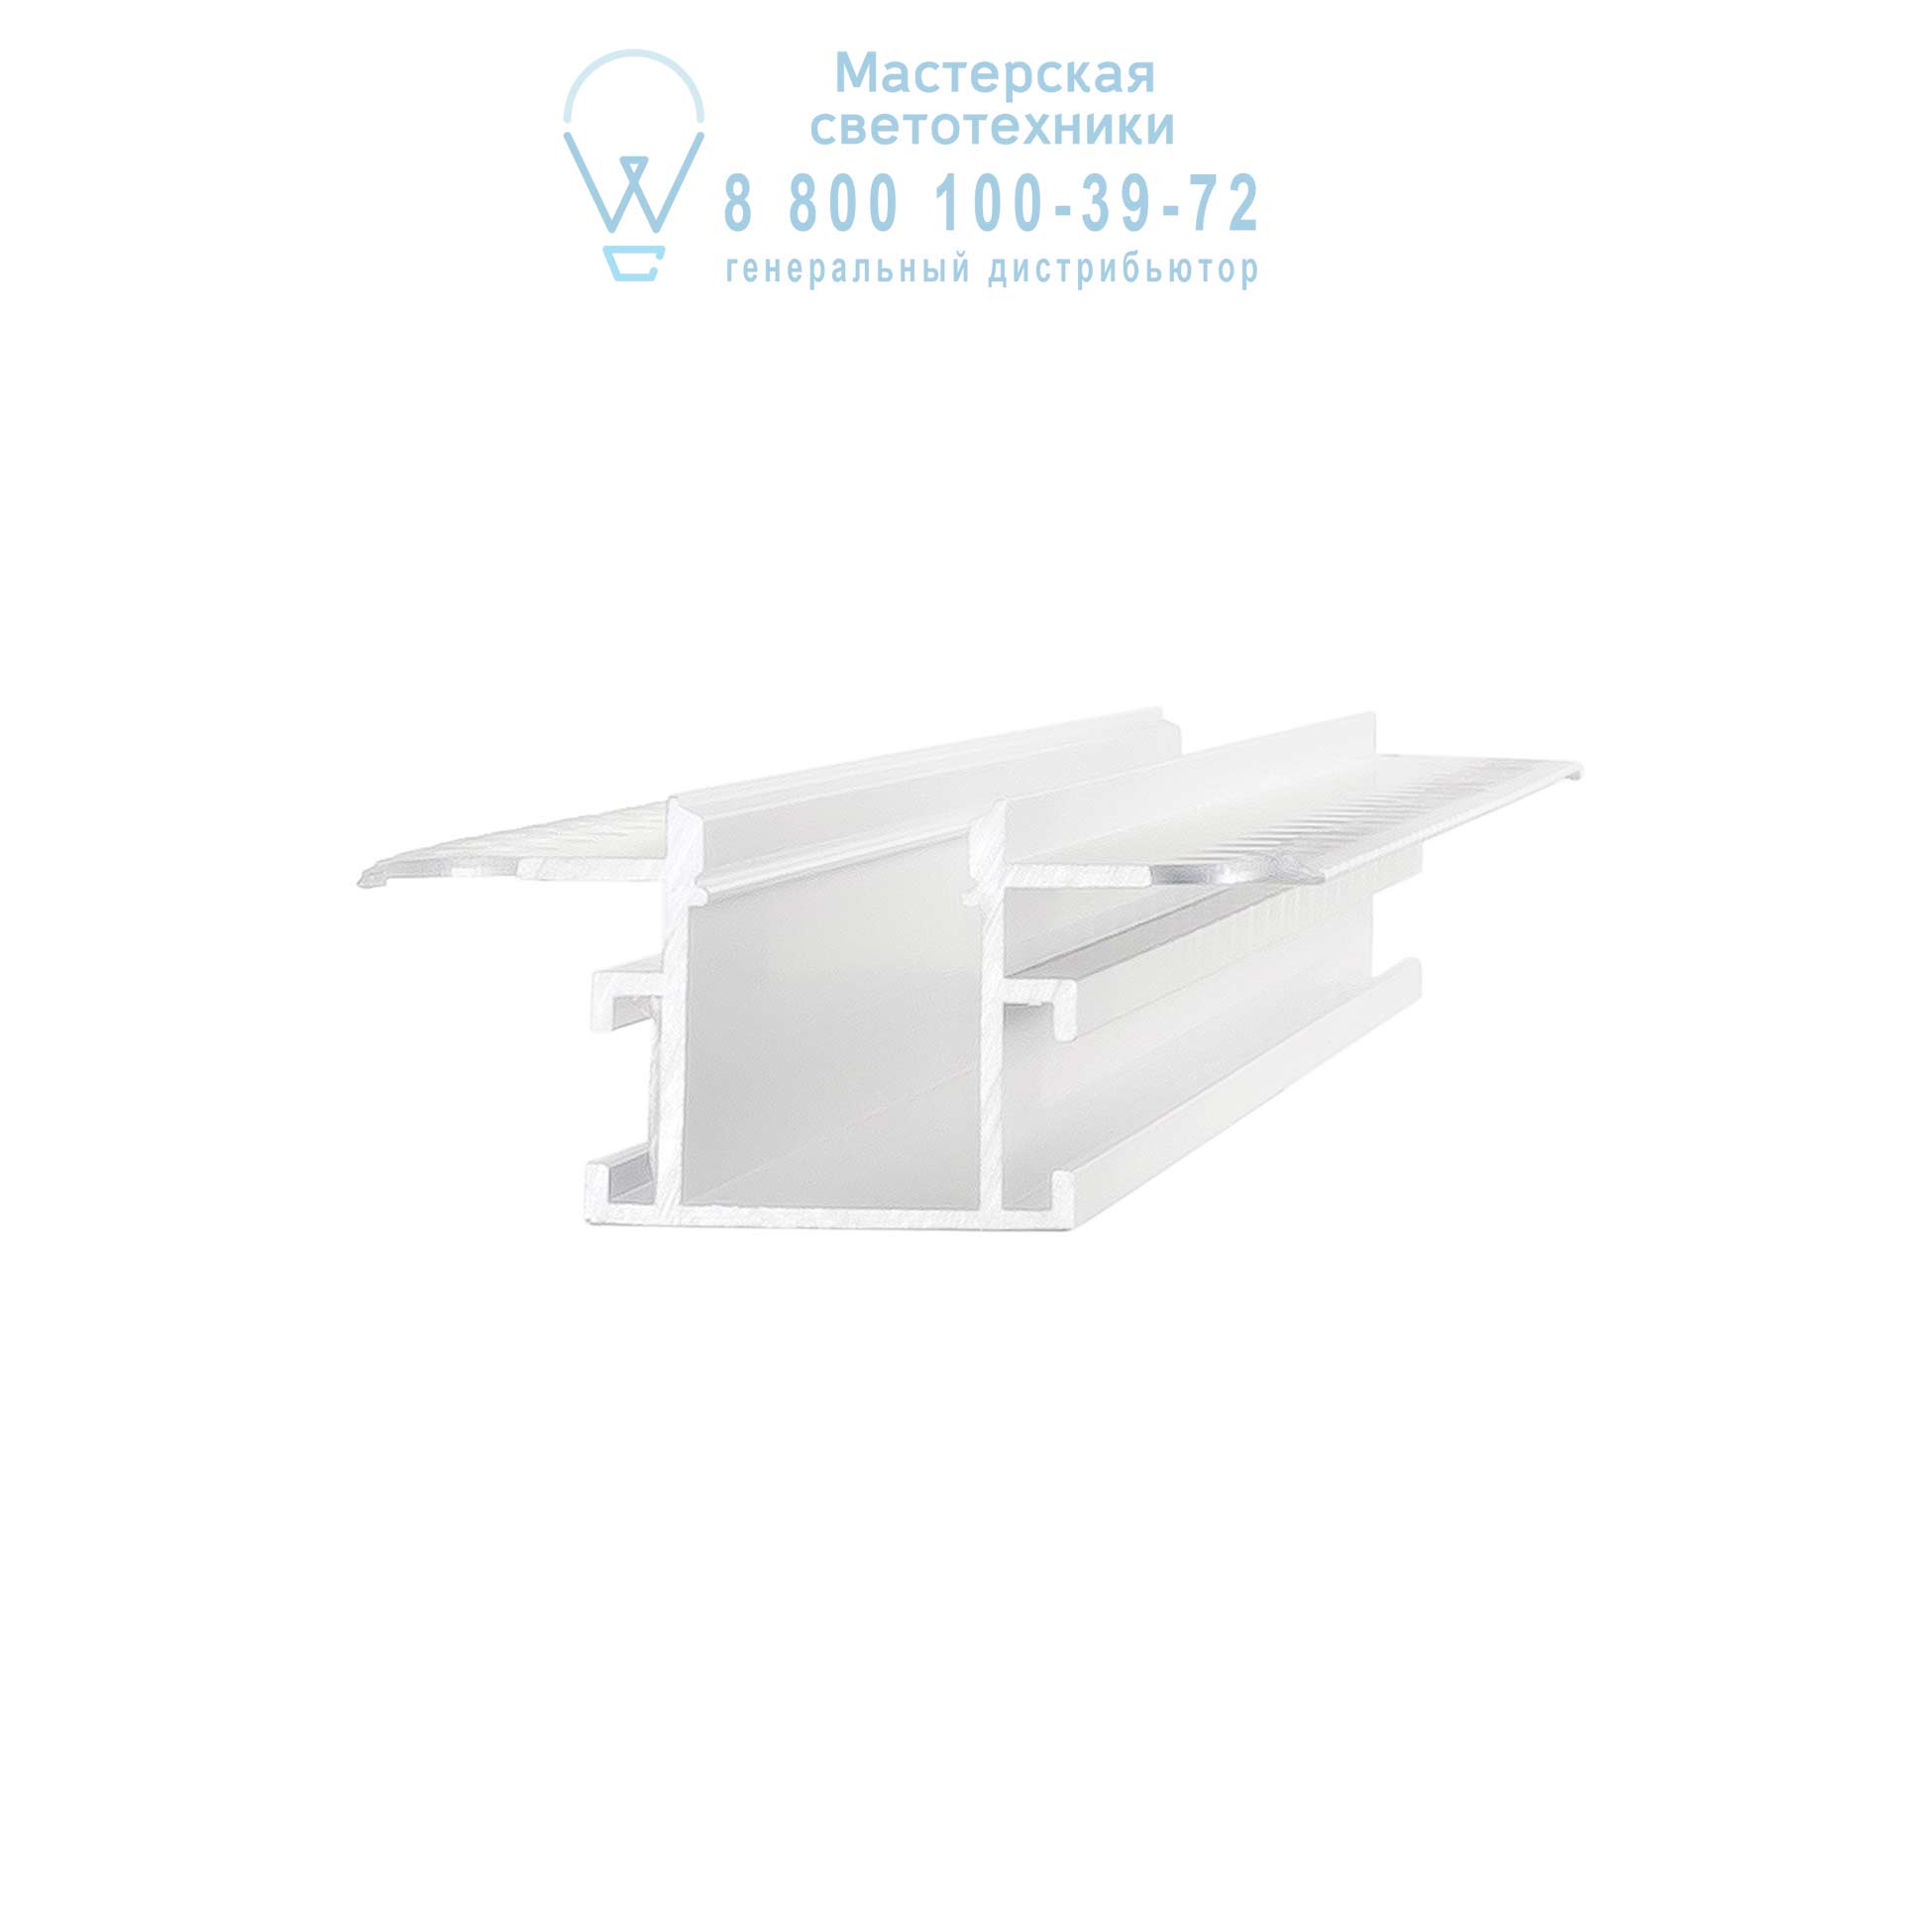 SLOT RECESSED TRIMLESS 14 x 3000 mm WHITE   